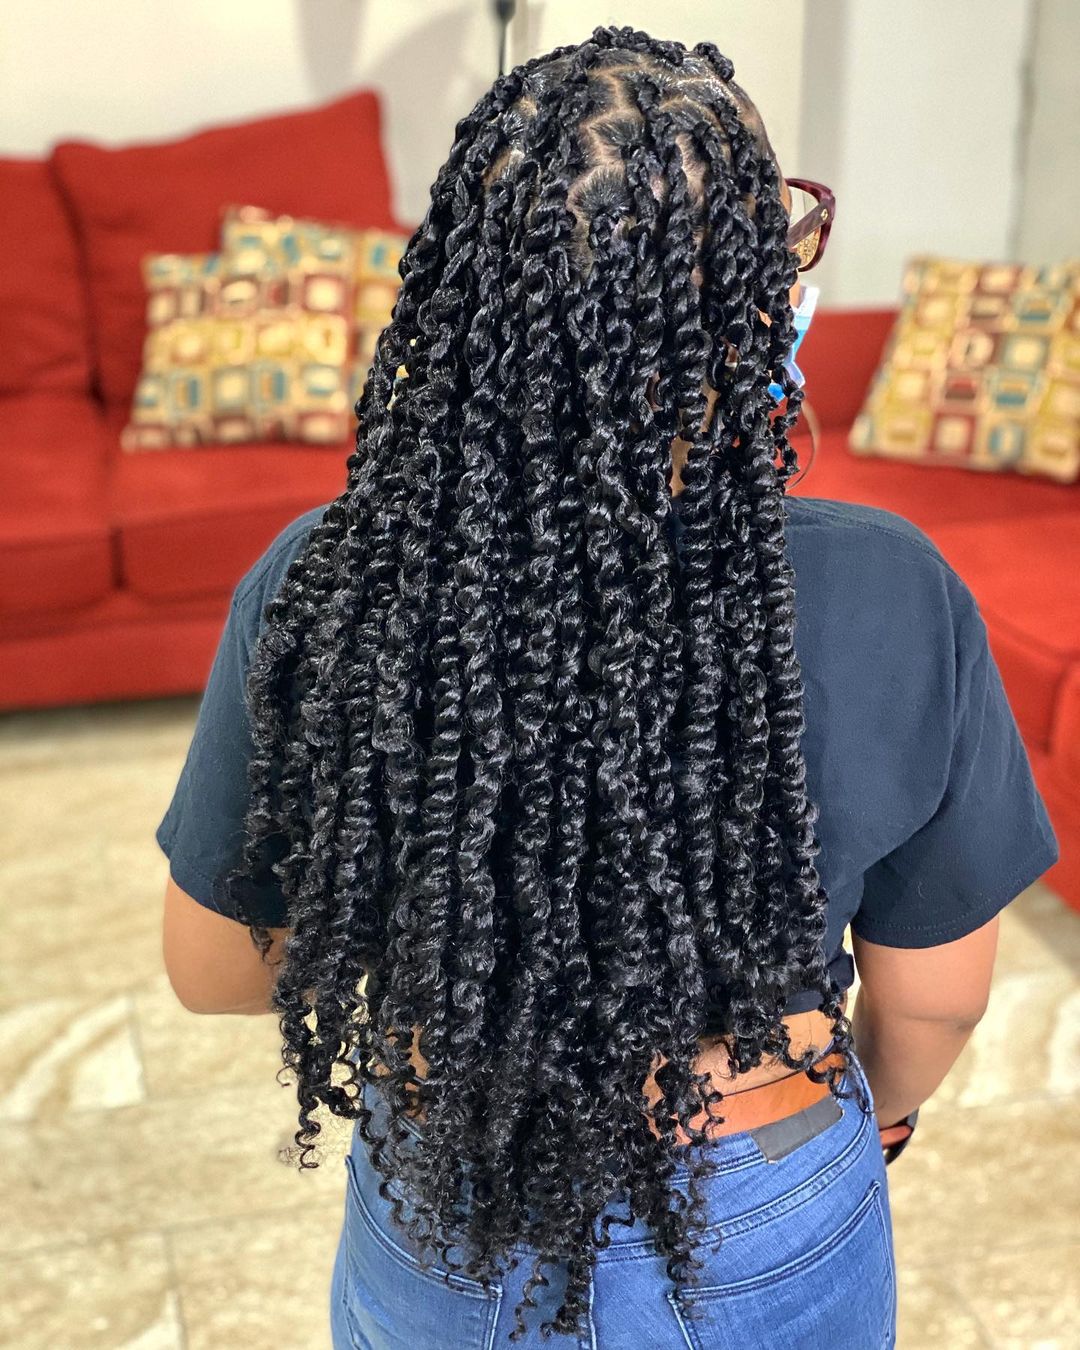 0Long Thick Protective Twists on Natural Hair